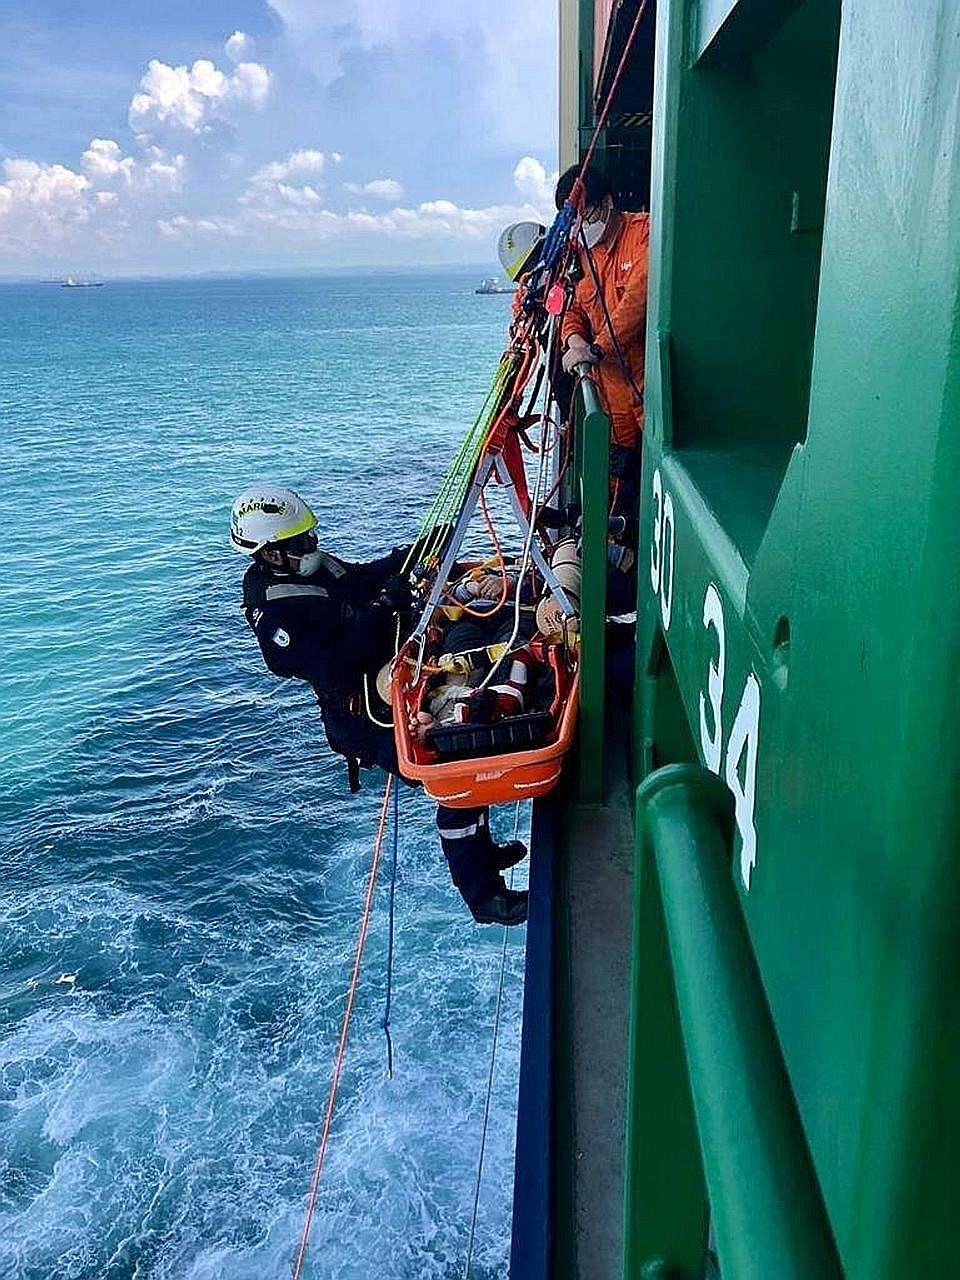 A Singapore Civil Defence Force marine specialist lowering the casualty on a stretcher to a heavy rescue vessel. The worker had injured his leg after falling down a hatch and was unable to move. PHOTO: SCDF/FACEBOOK